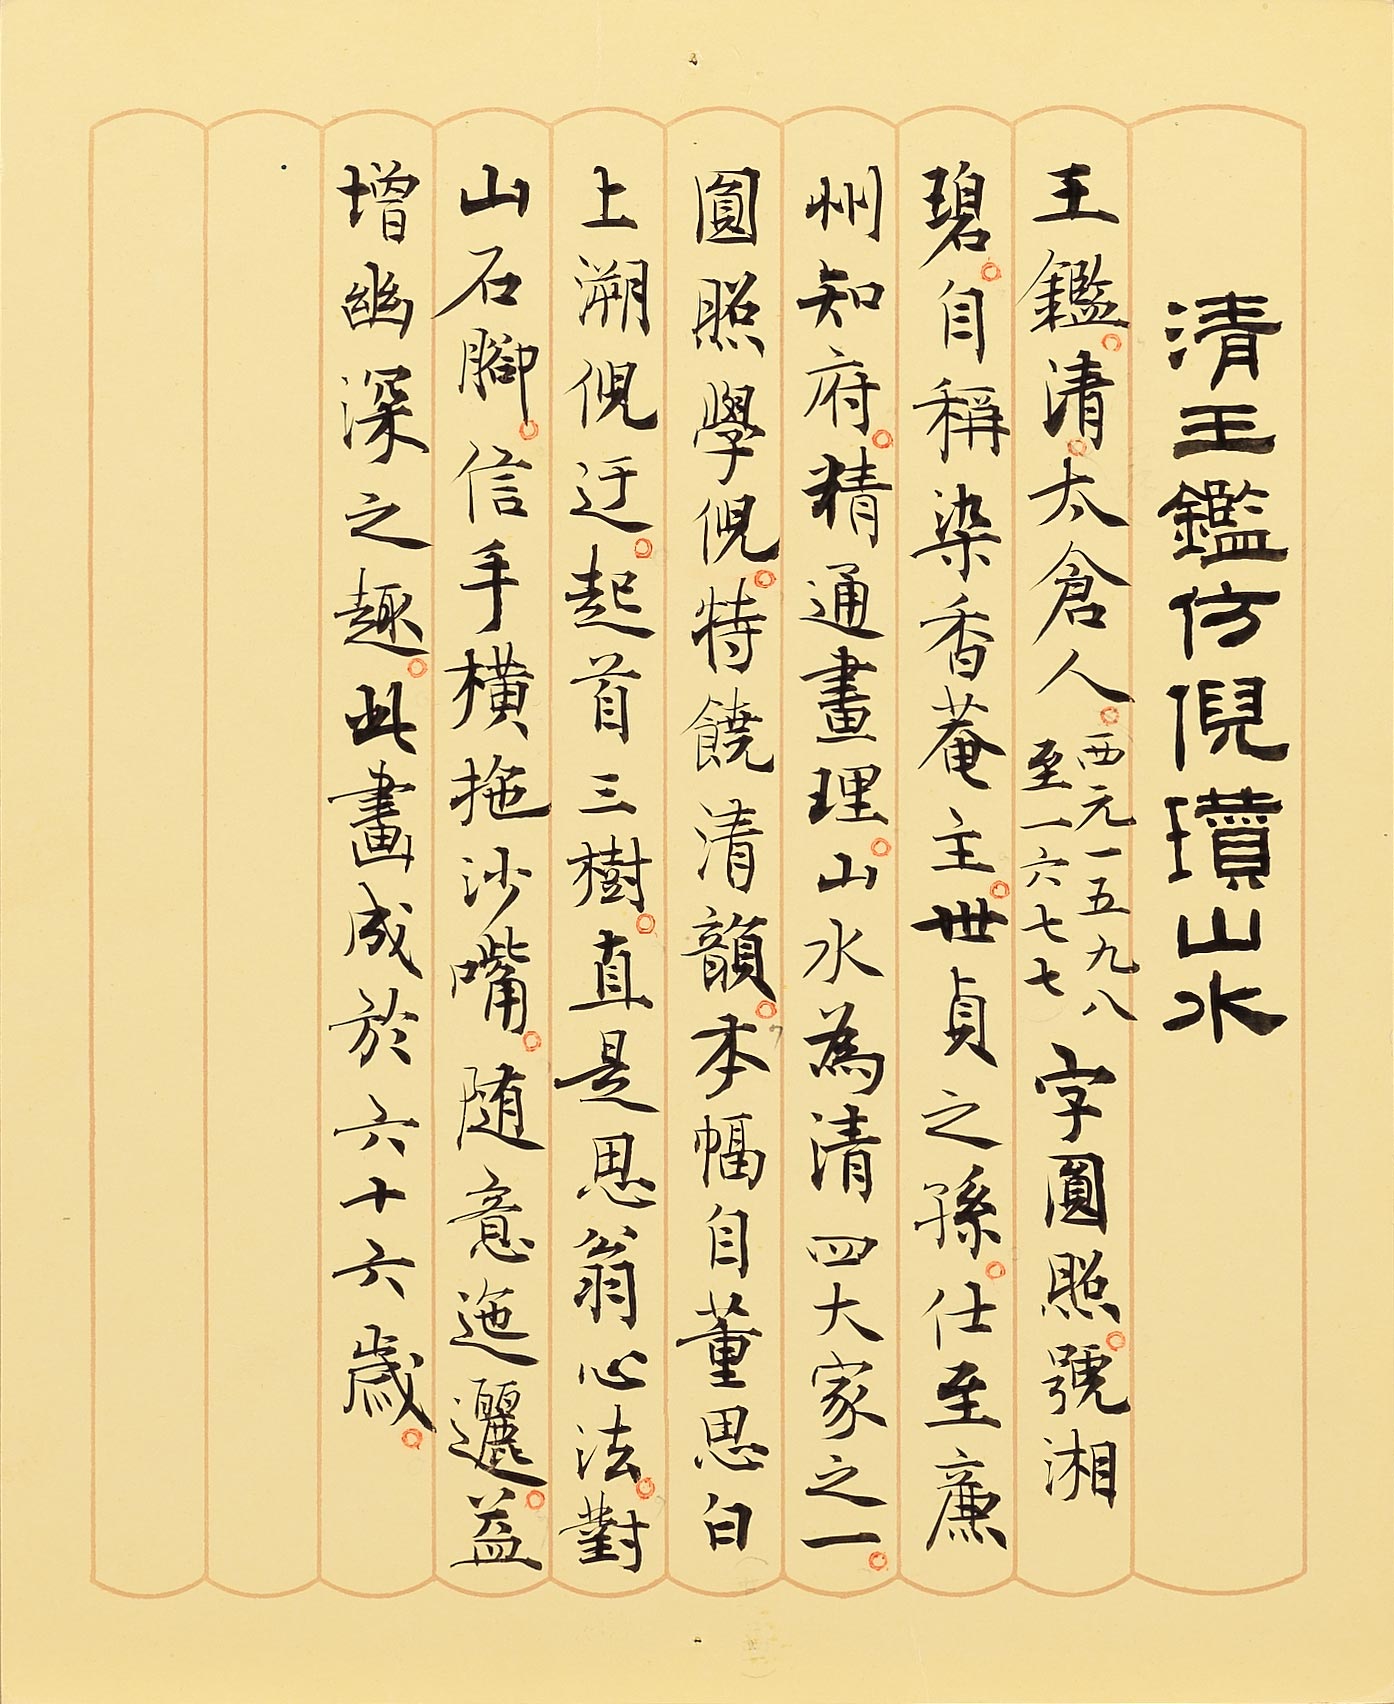 Explanatory cards written in brush and ink appeared from the mid-1960s. The author and calligrapher of this card was Fu Shen.